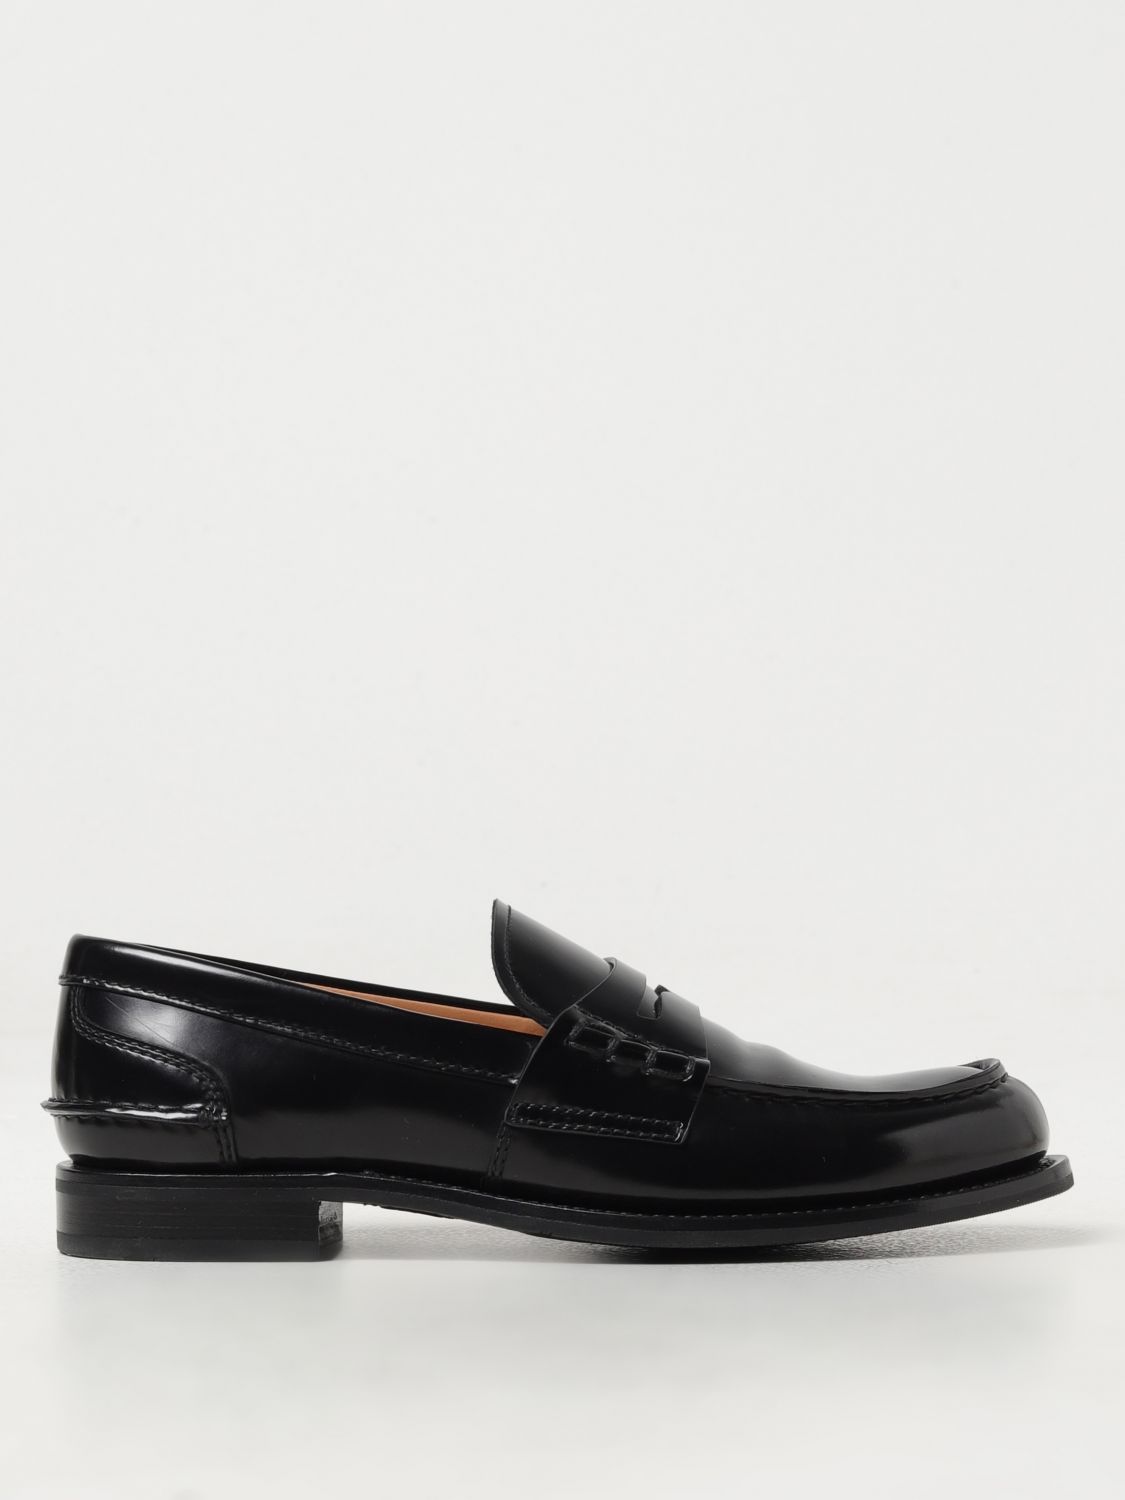 Church's Woman Loafers Black Size 10 Leather